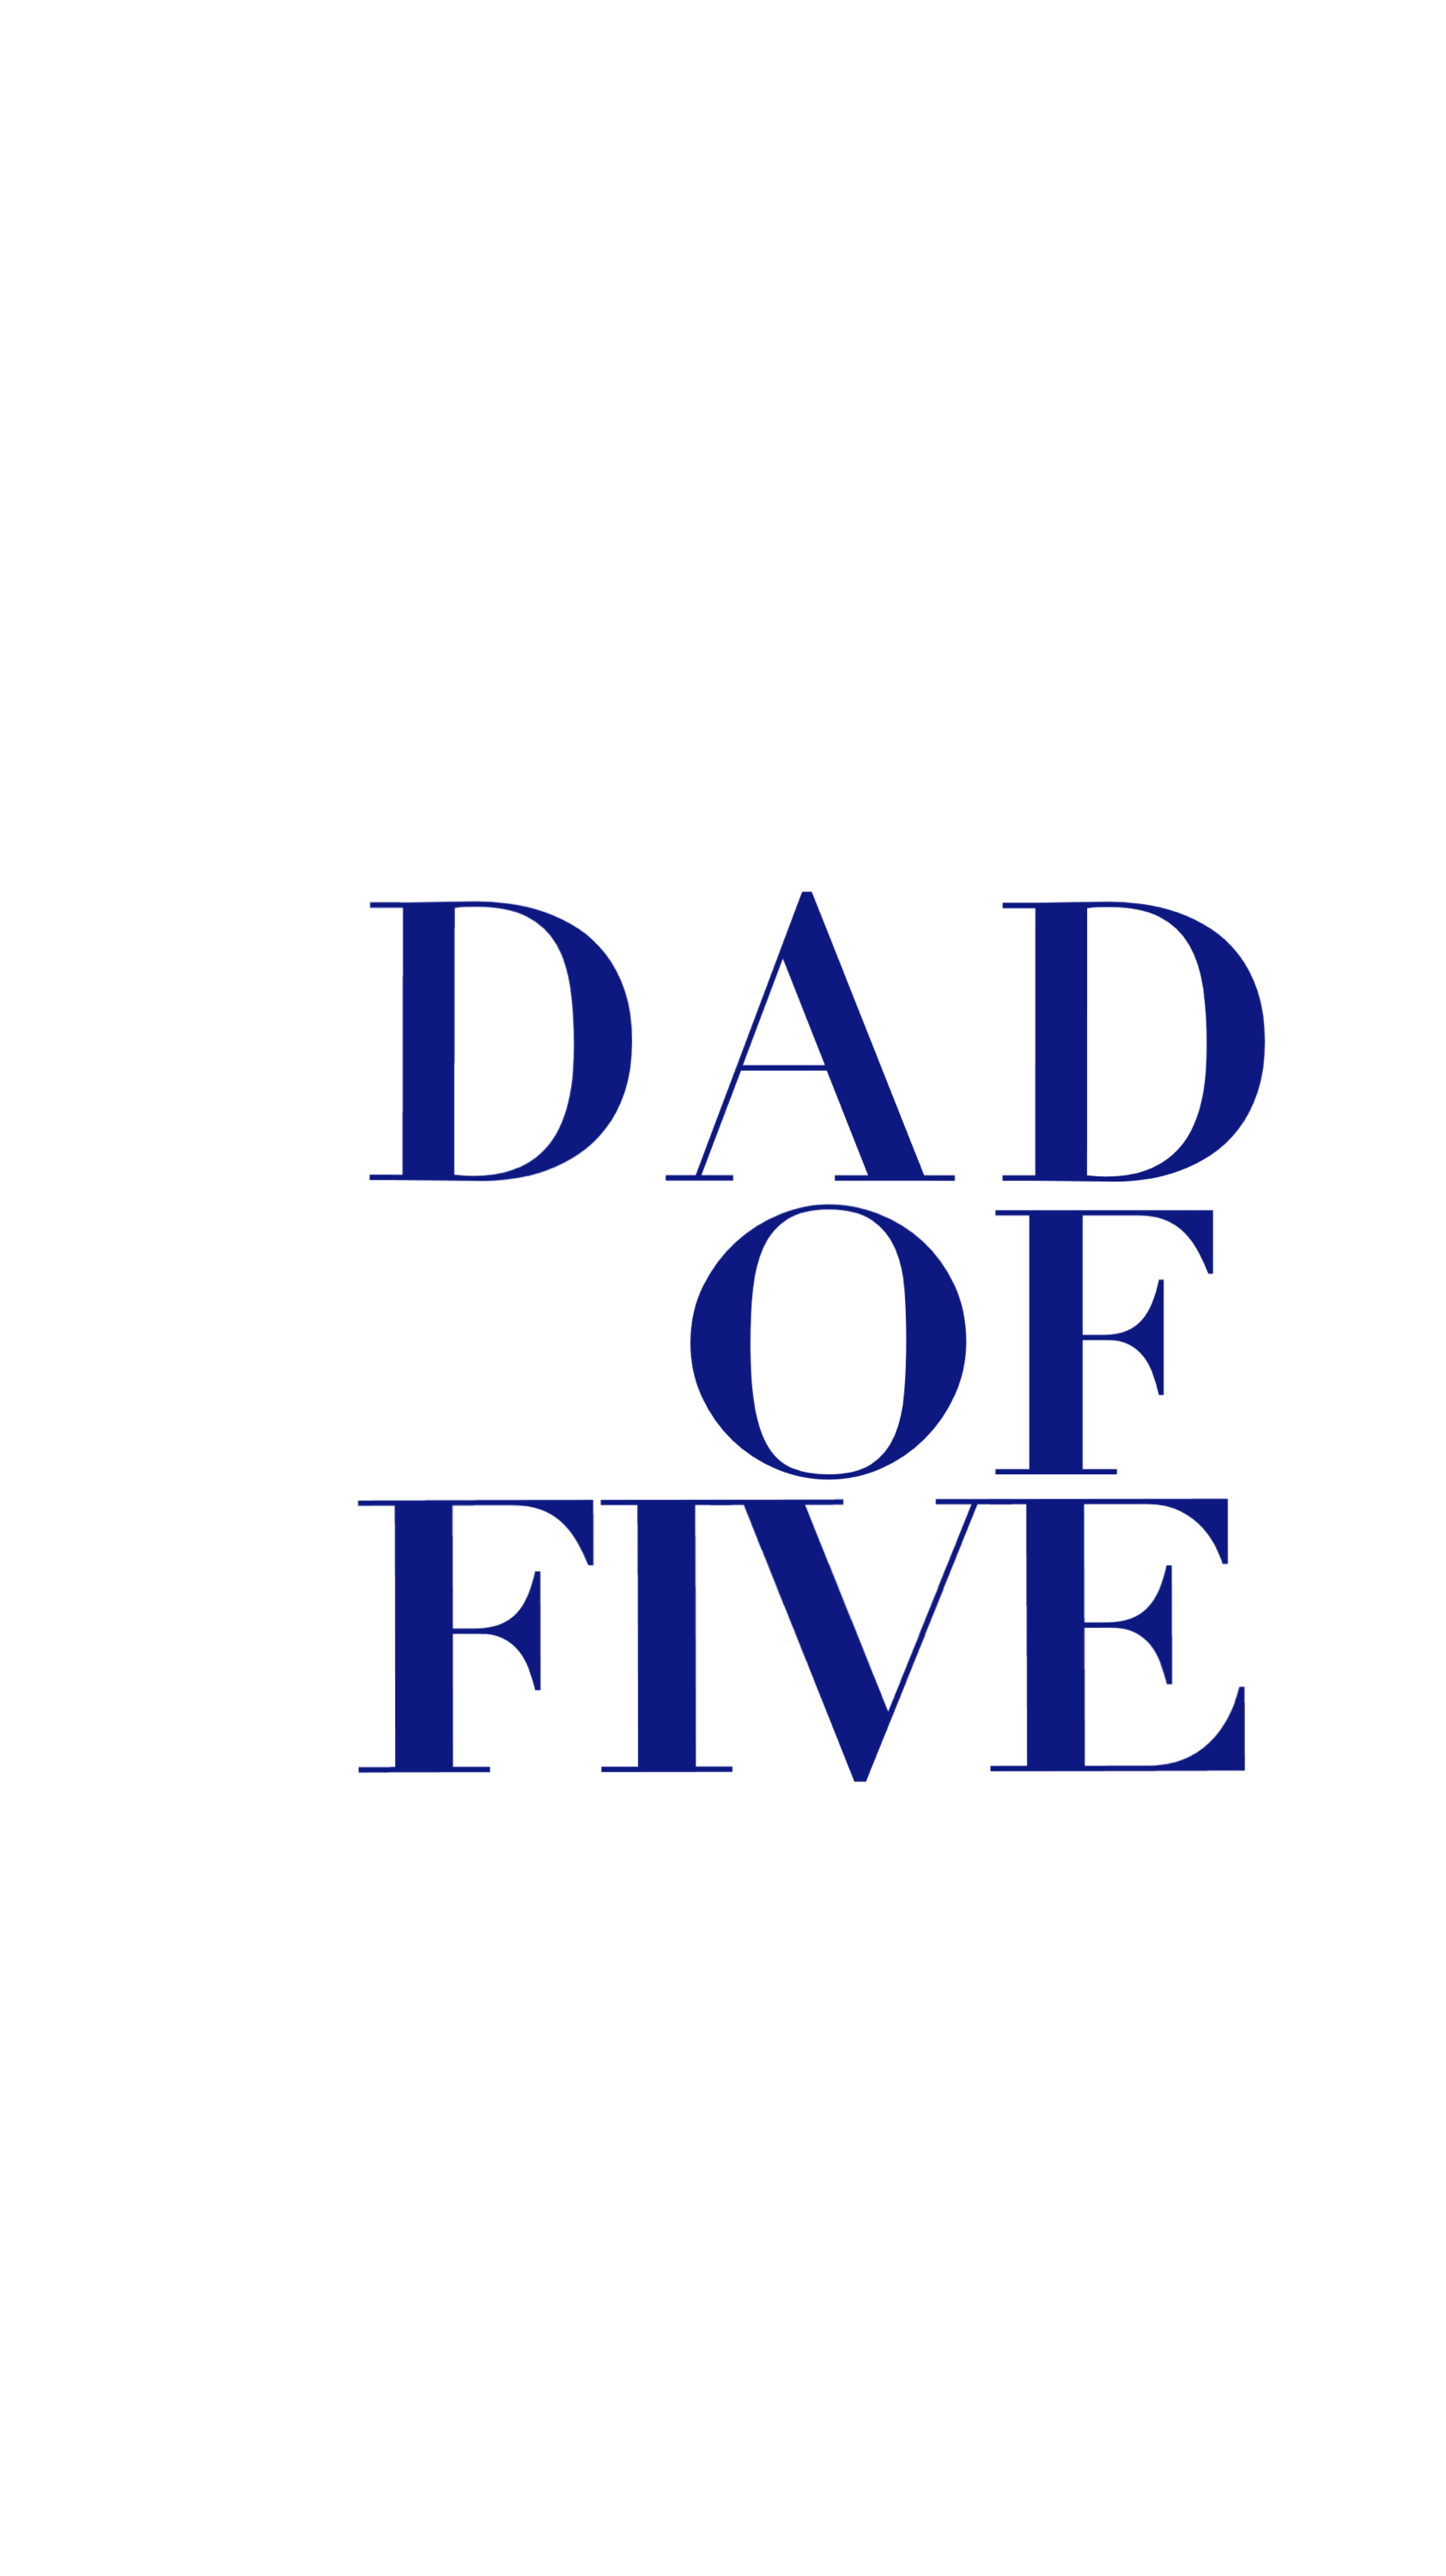 DAD OF NAVY BLUE! DAD OF ONE, TWO, THREE...